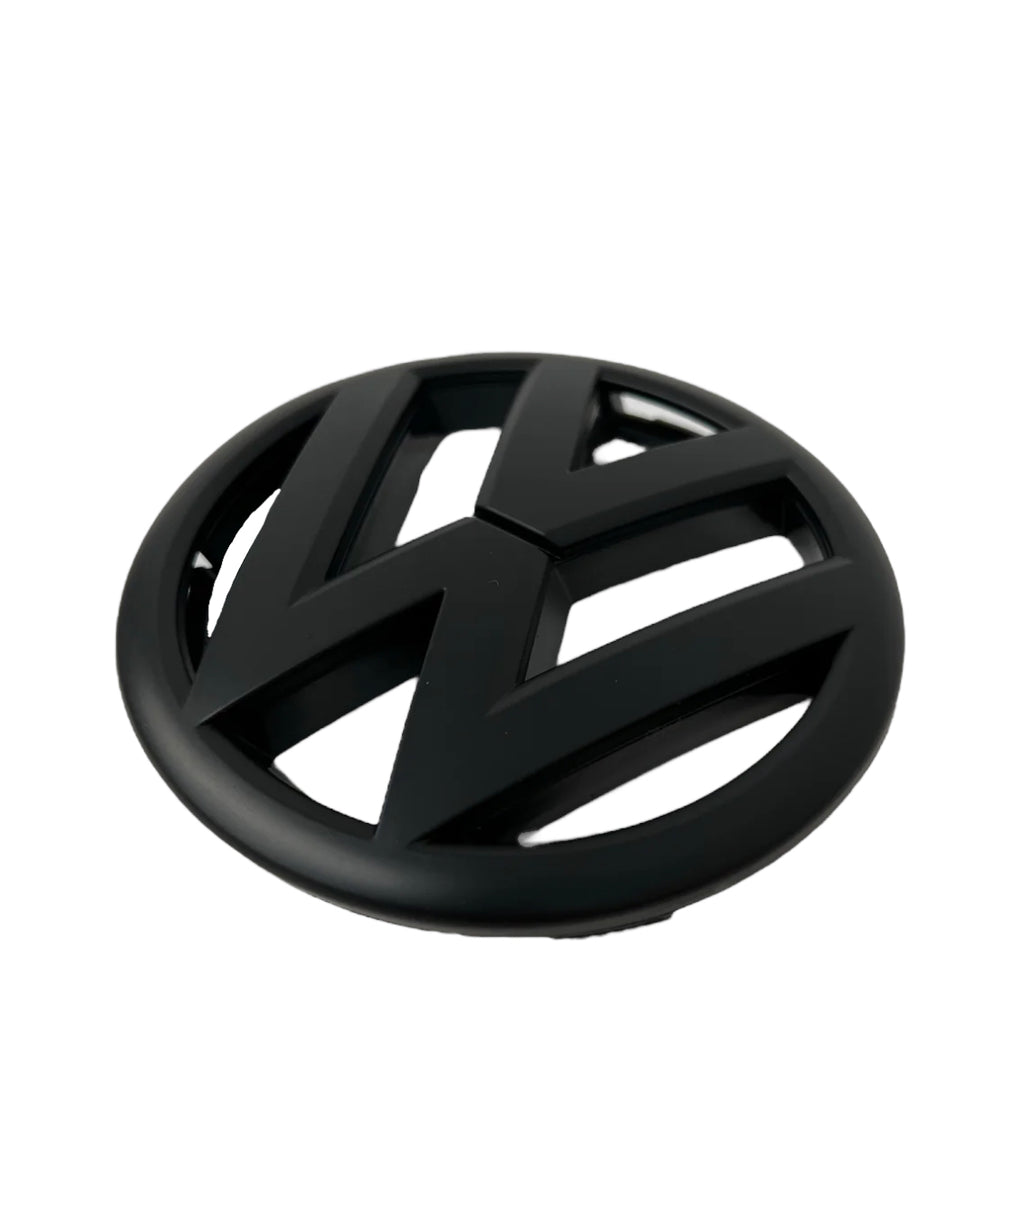 Volkswagen Logo Front / Rear Emblem Auto Decal for VW Polo 2014-2016